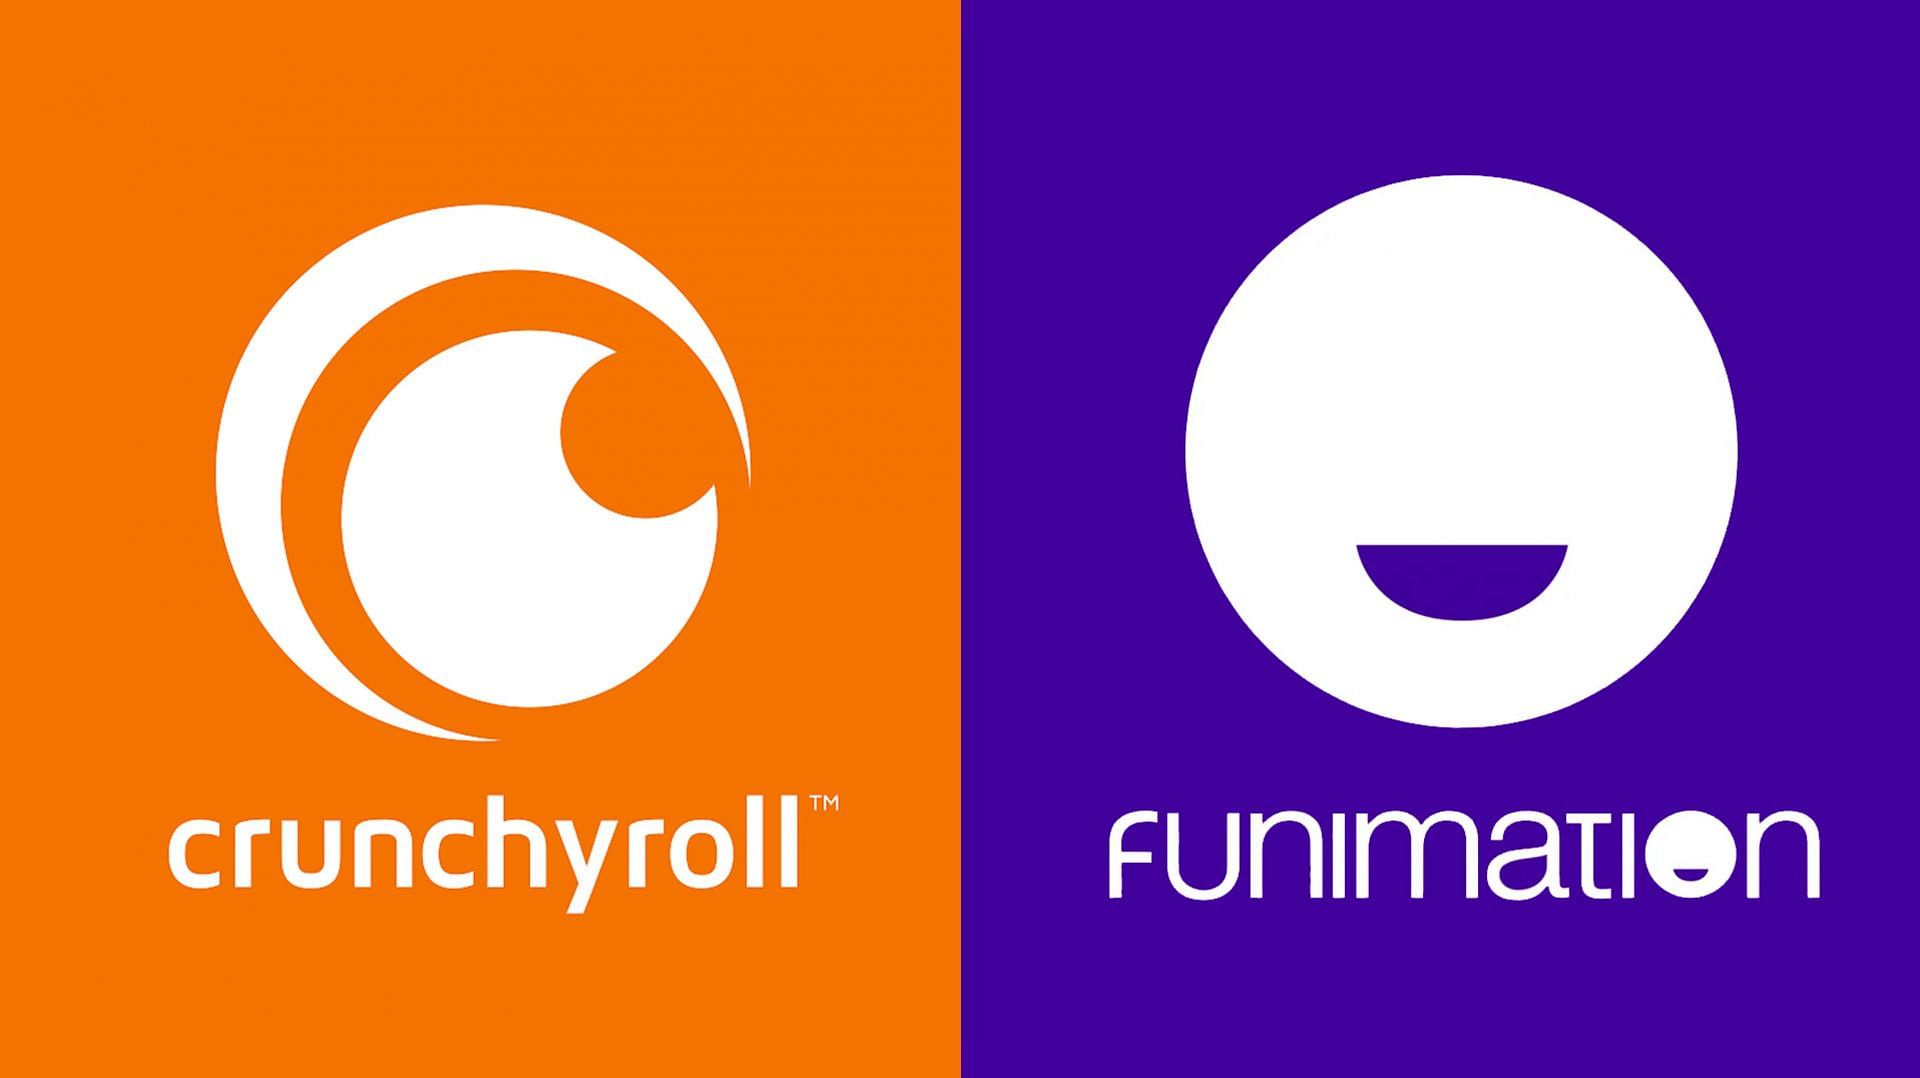 Popular streaming platform announced that all of their dubbed content will be uploaded on Funimation&#039;s YouTube channel (image vis Crunchyroll and Funimation)